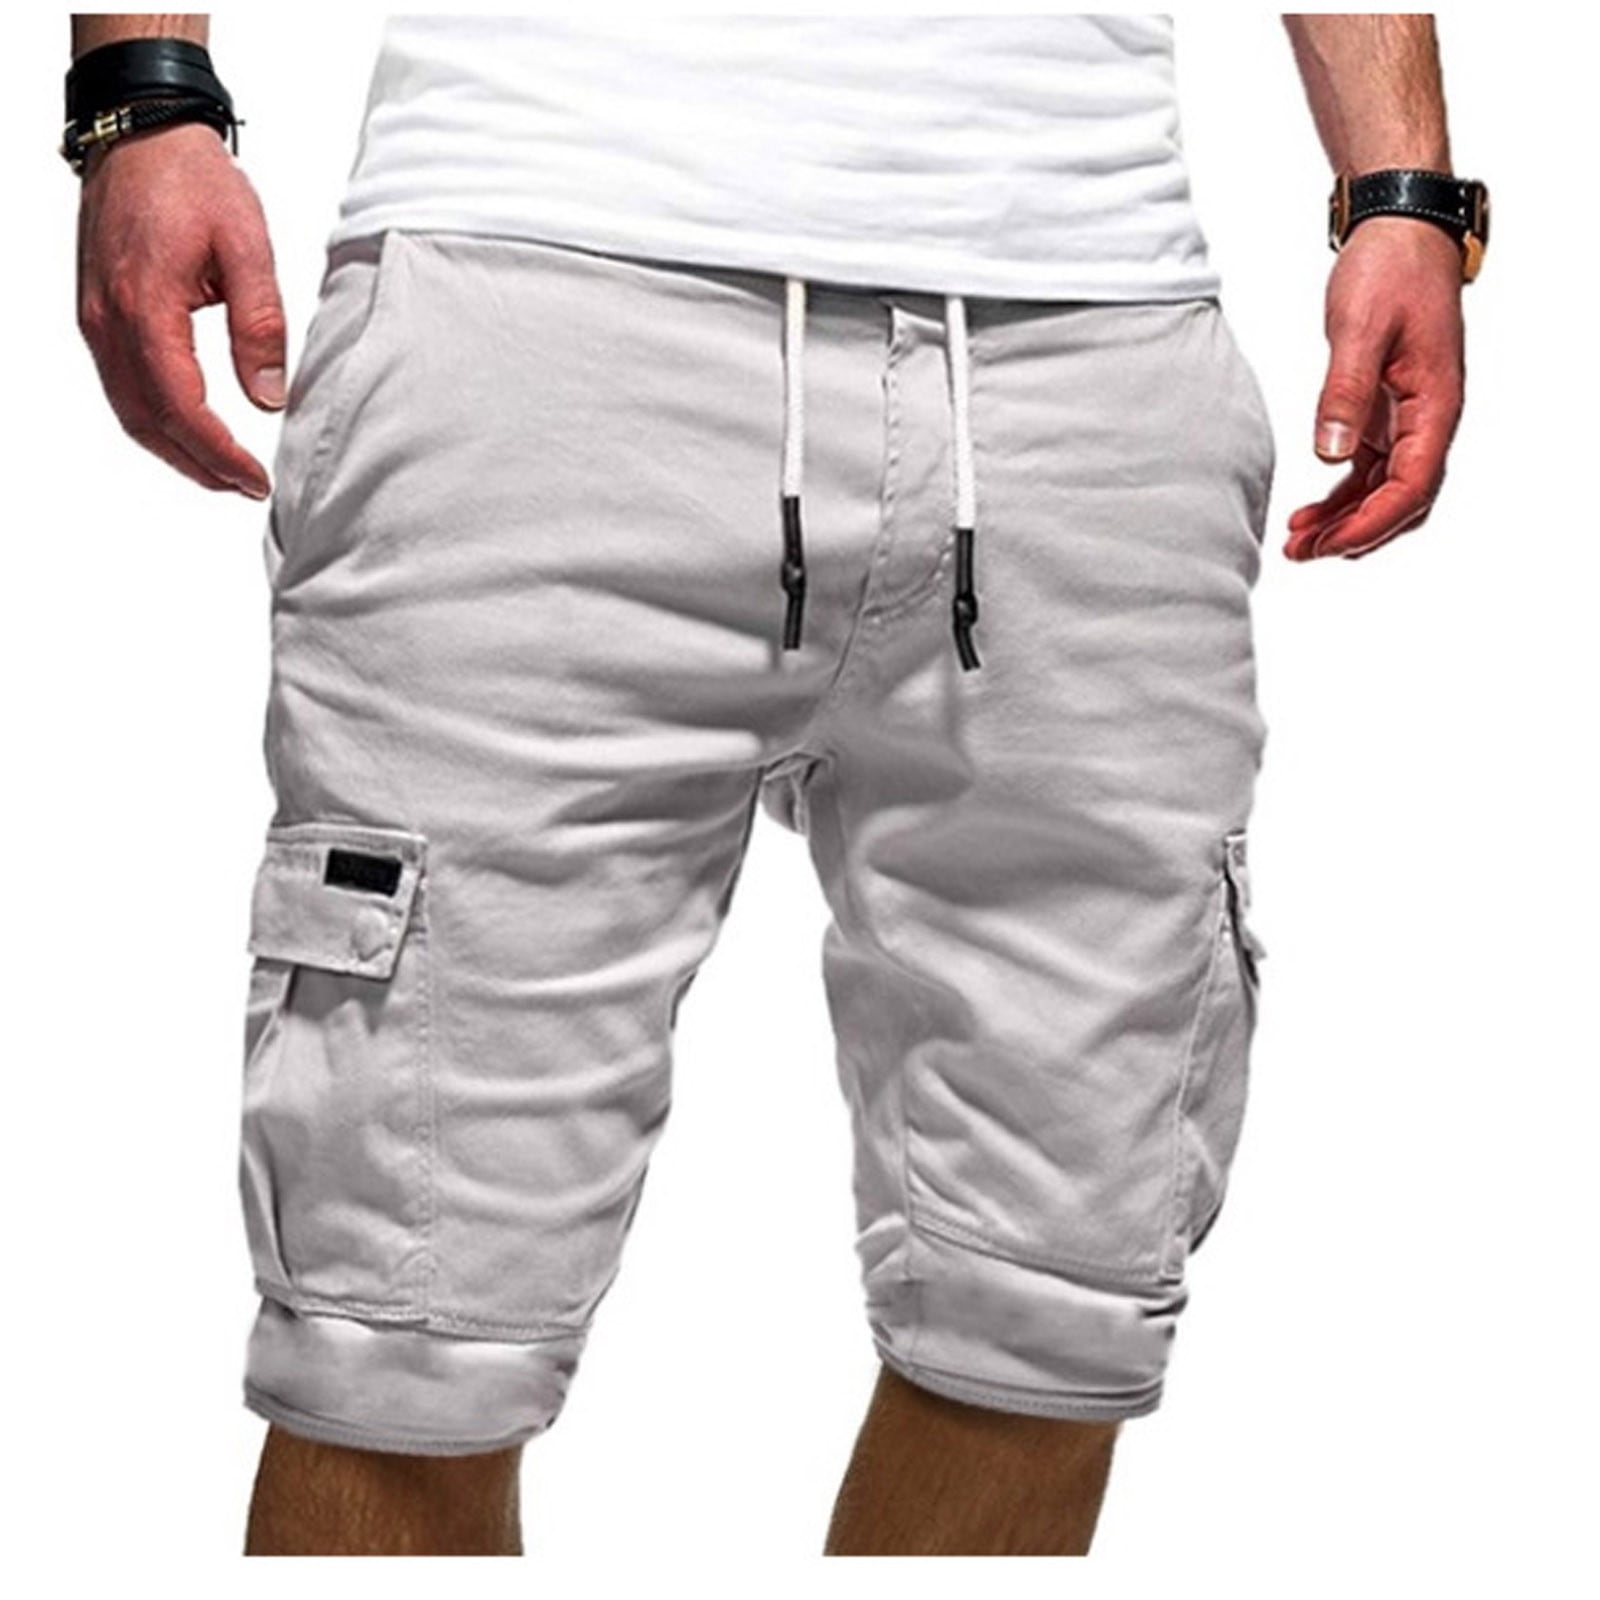 Men's Cargo Shorts Plus Size Big and Tall Cargo Shorts Multi-Pockets ...